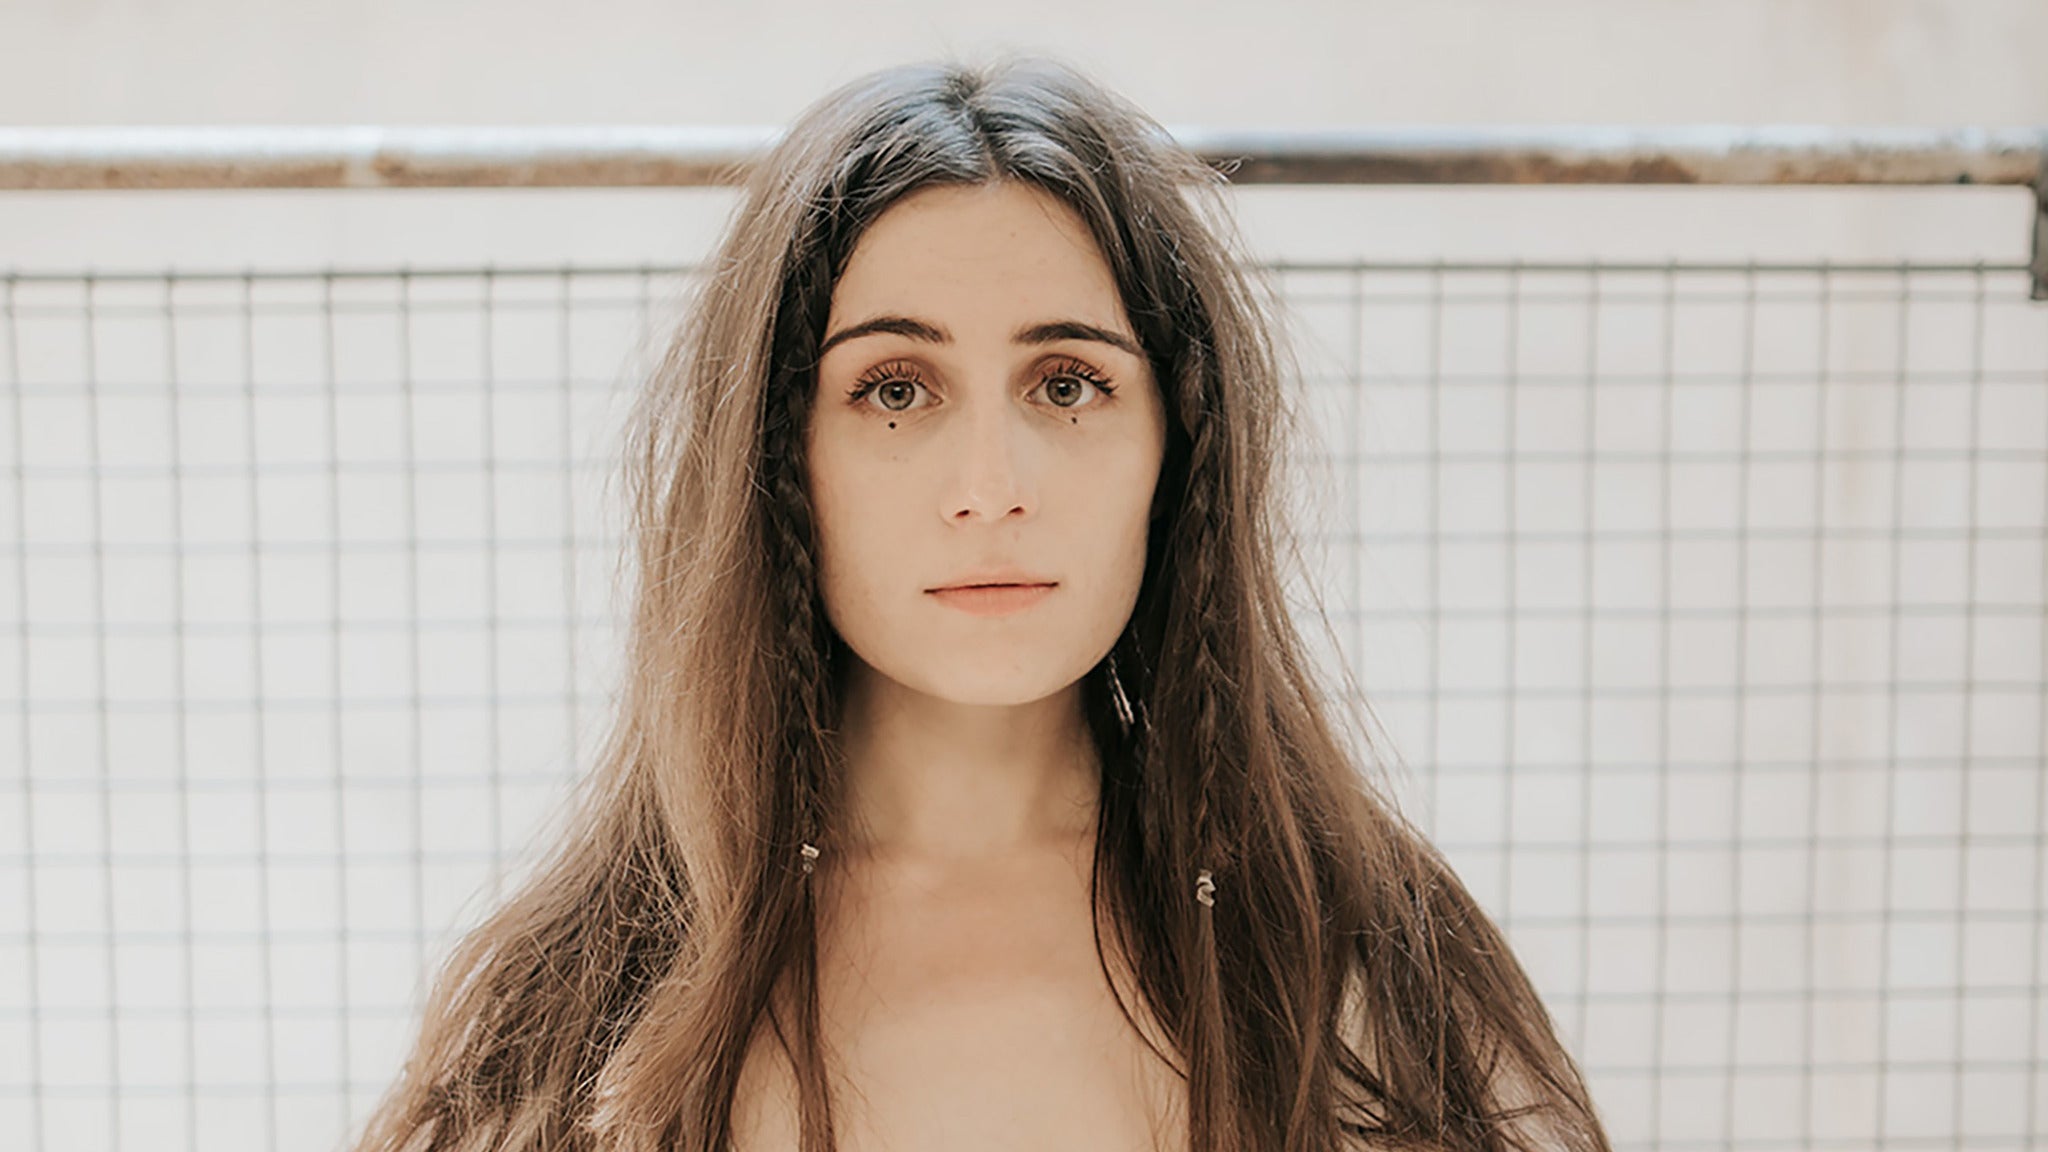 Image used with permission from Ticketmaster | dodie Build A Problem Tour with Lizzy McAlpine tickets